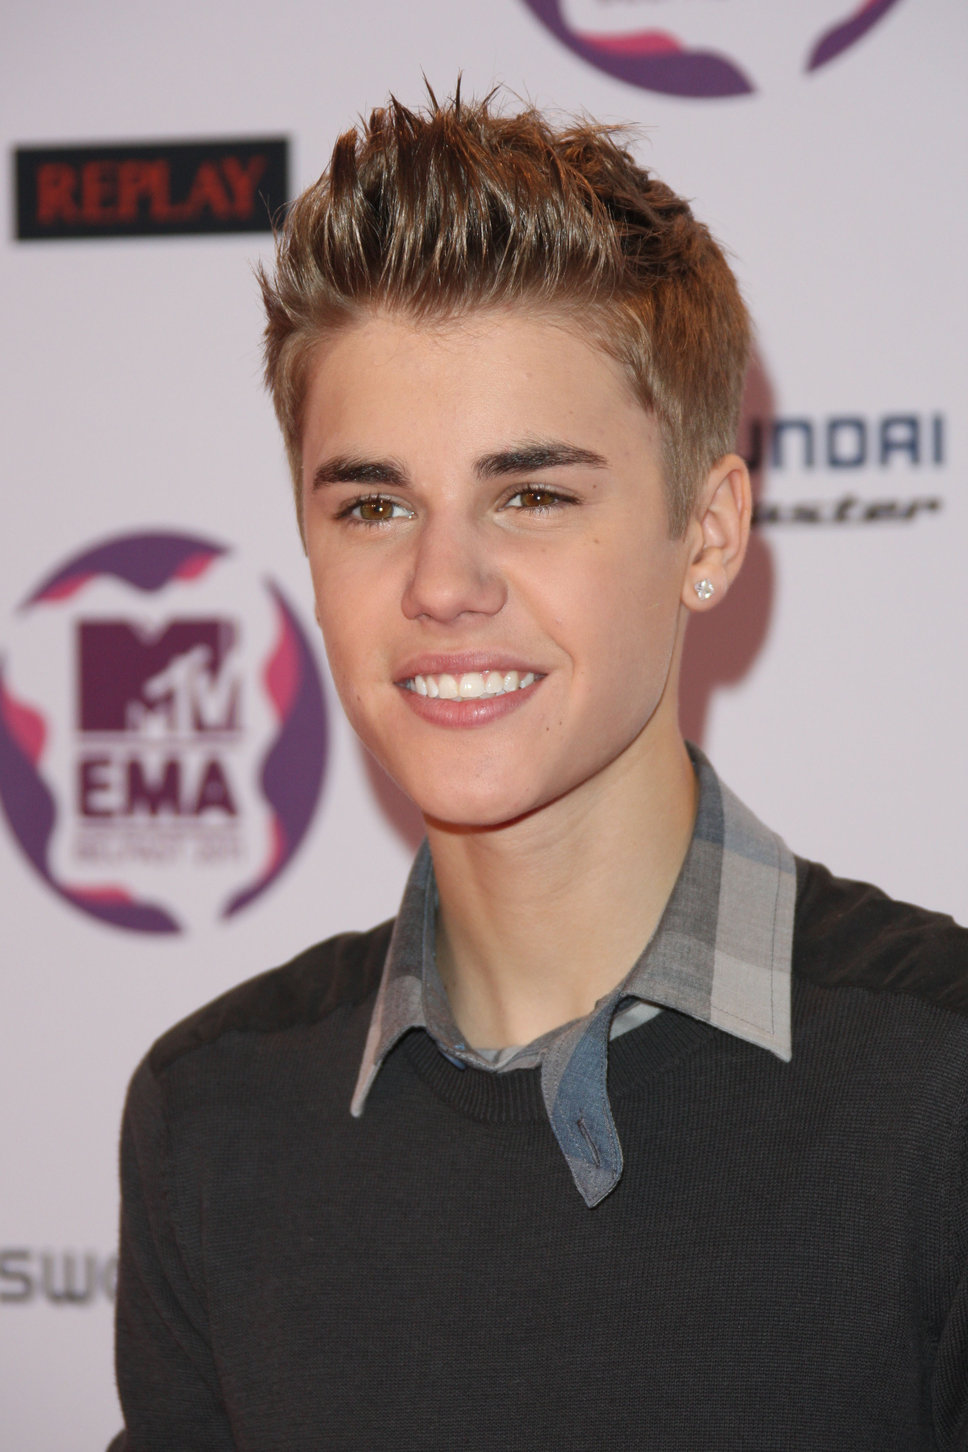 Justin Bieber's New Look At MTV EMAs 2011 | Guys Fashion Trends 2013